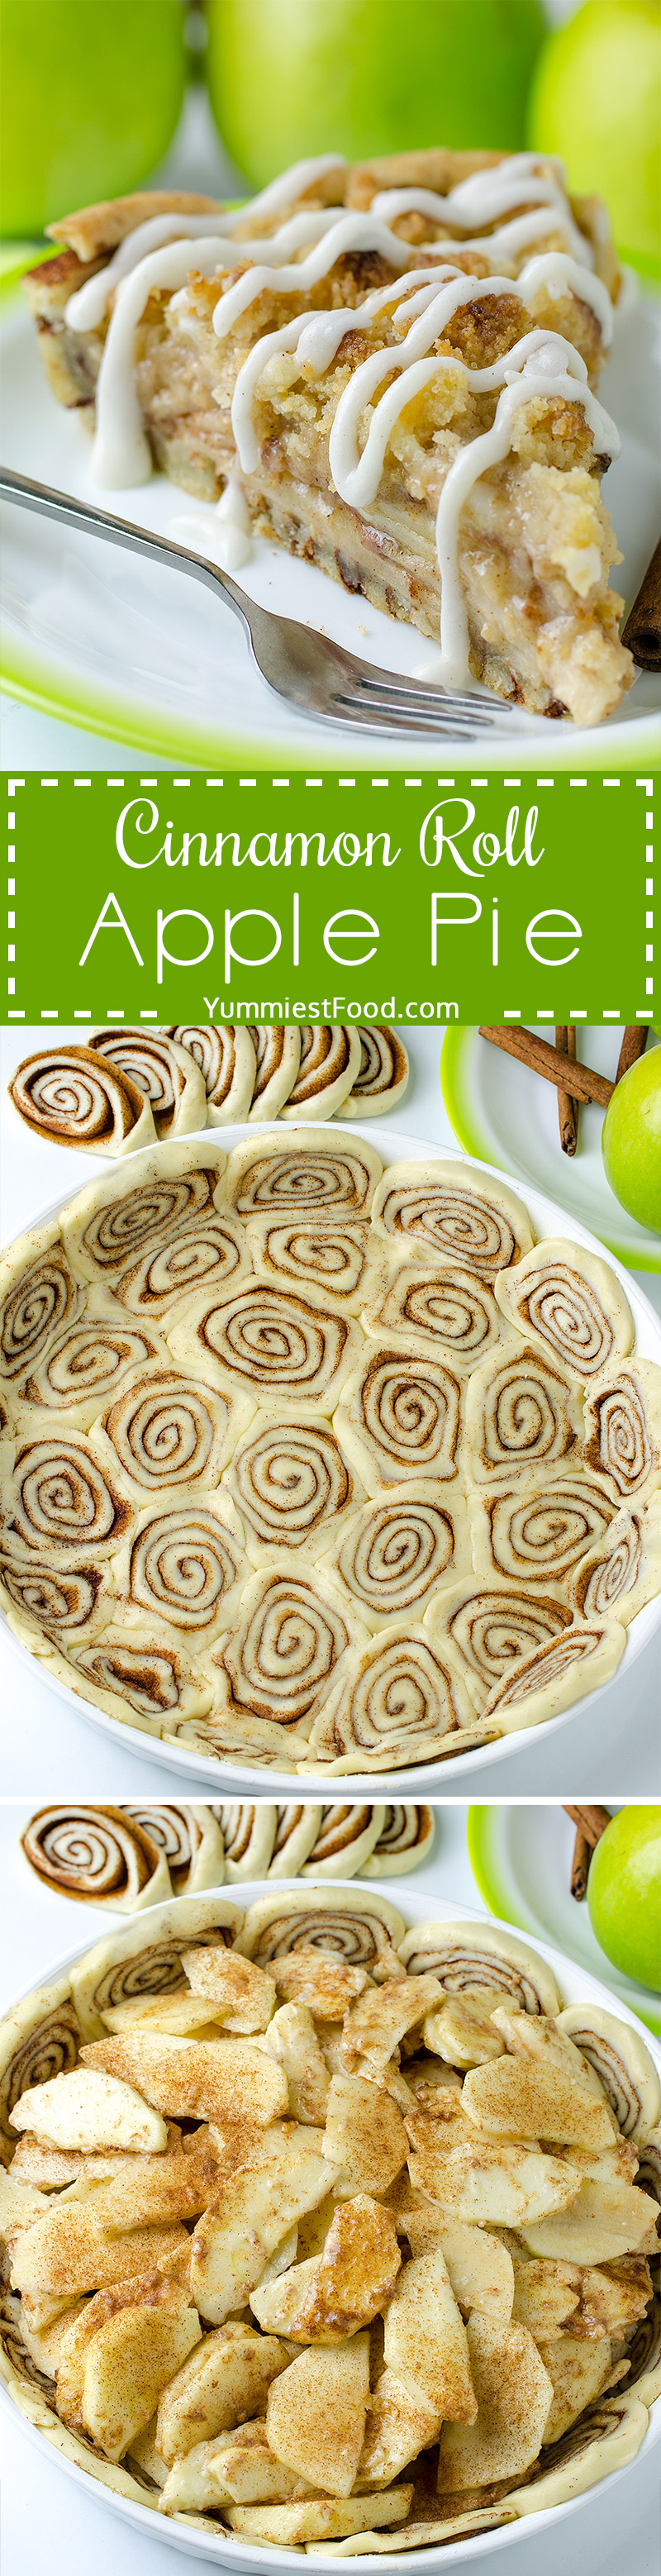 CINNAMON ROLL APPLE PIE - is perfect Thanksgiving treat. Combo of classic apple pie and yummy cinnamon rolls